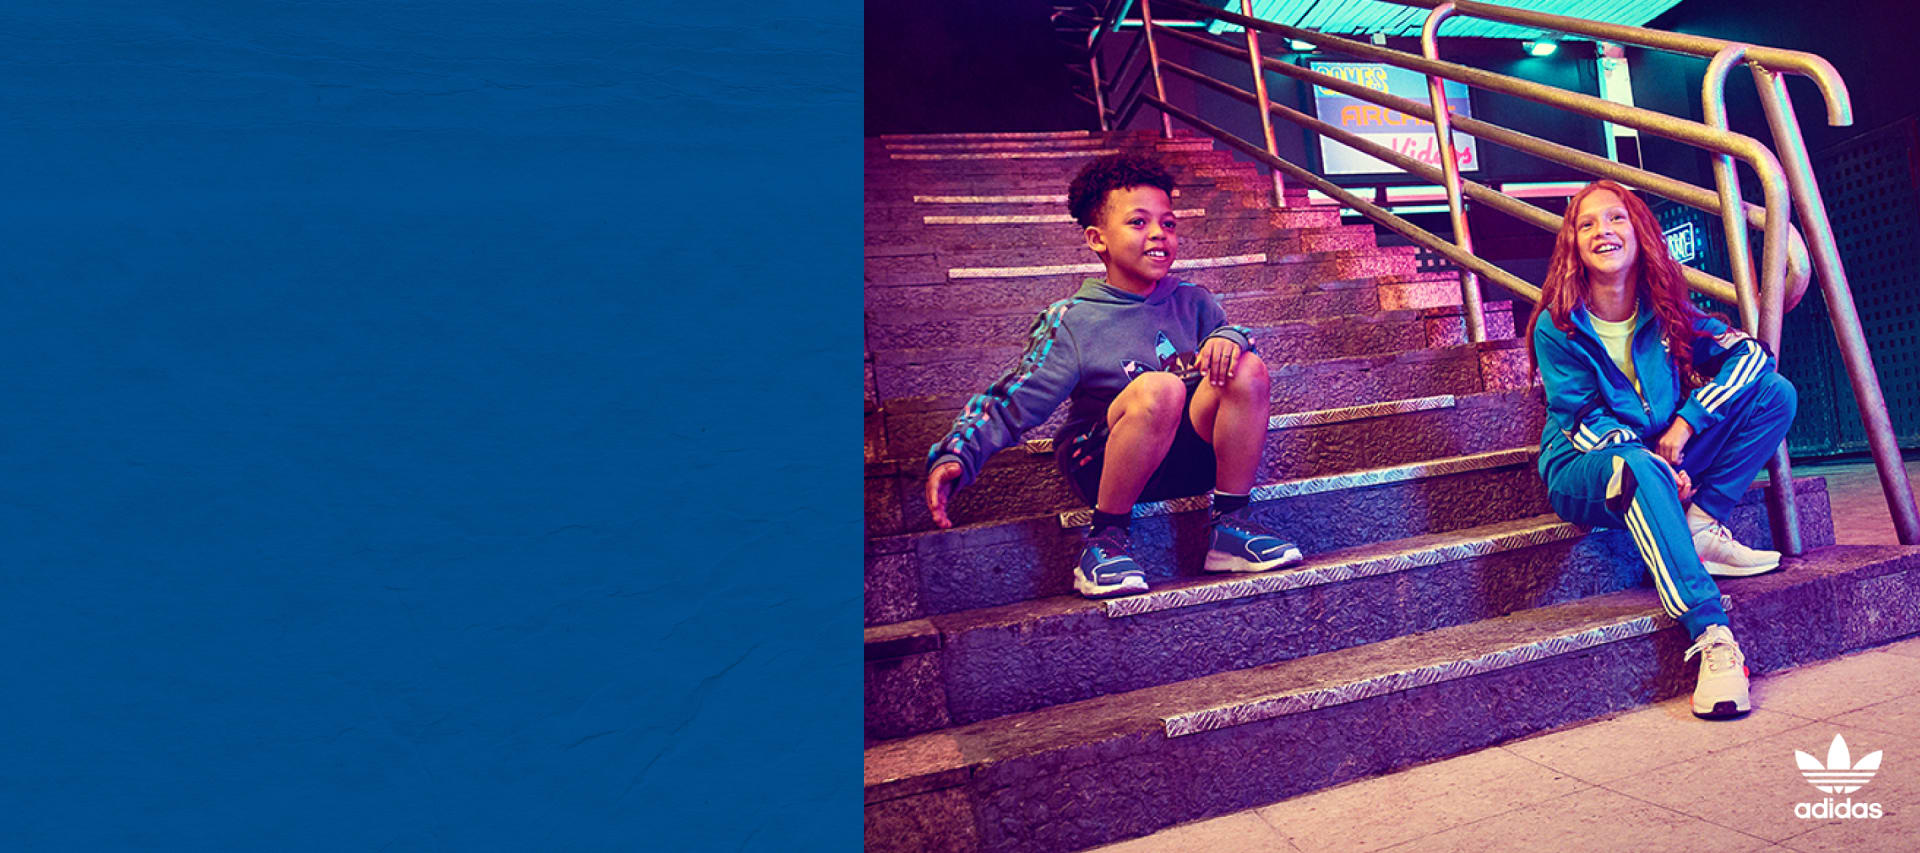 Two kids playfully pose in the latest evolution of the NMD.